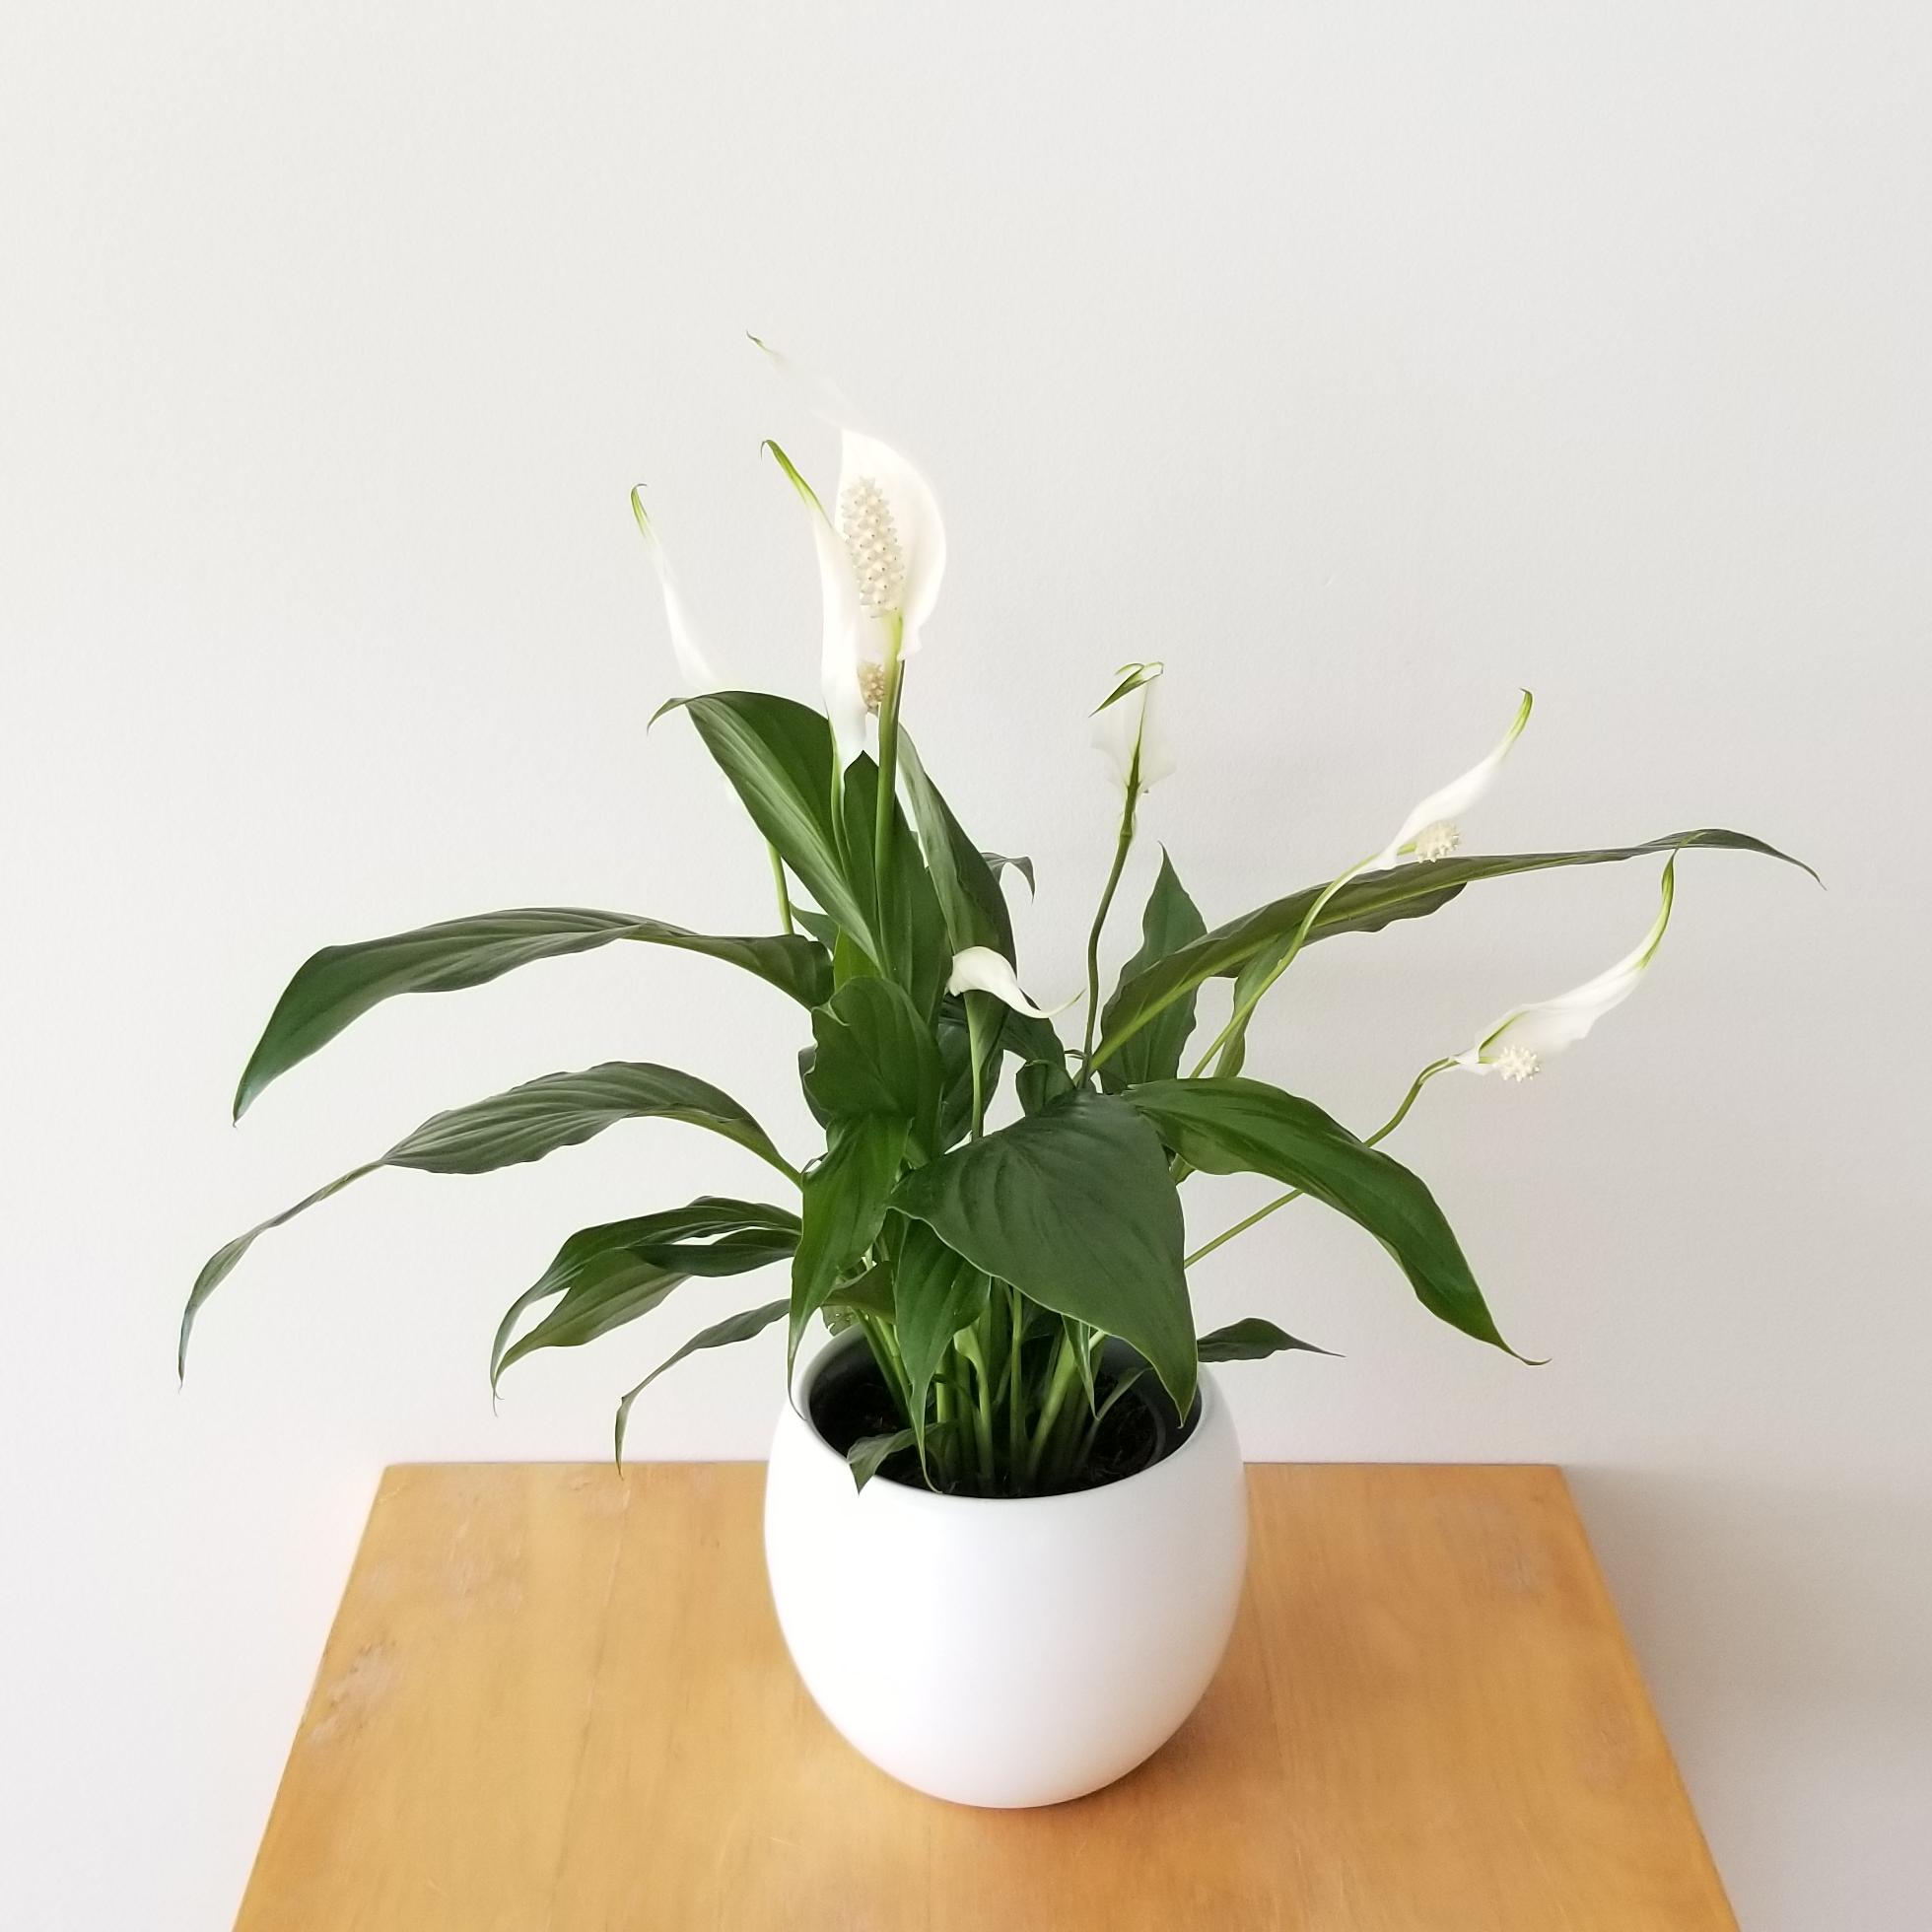 How to Remove Browning Peace Lily Flowers?